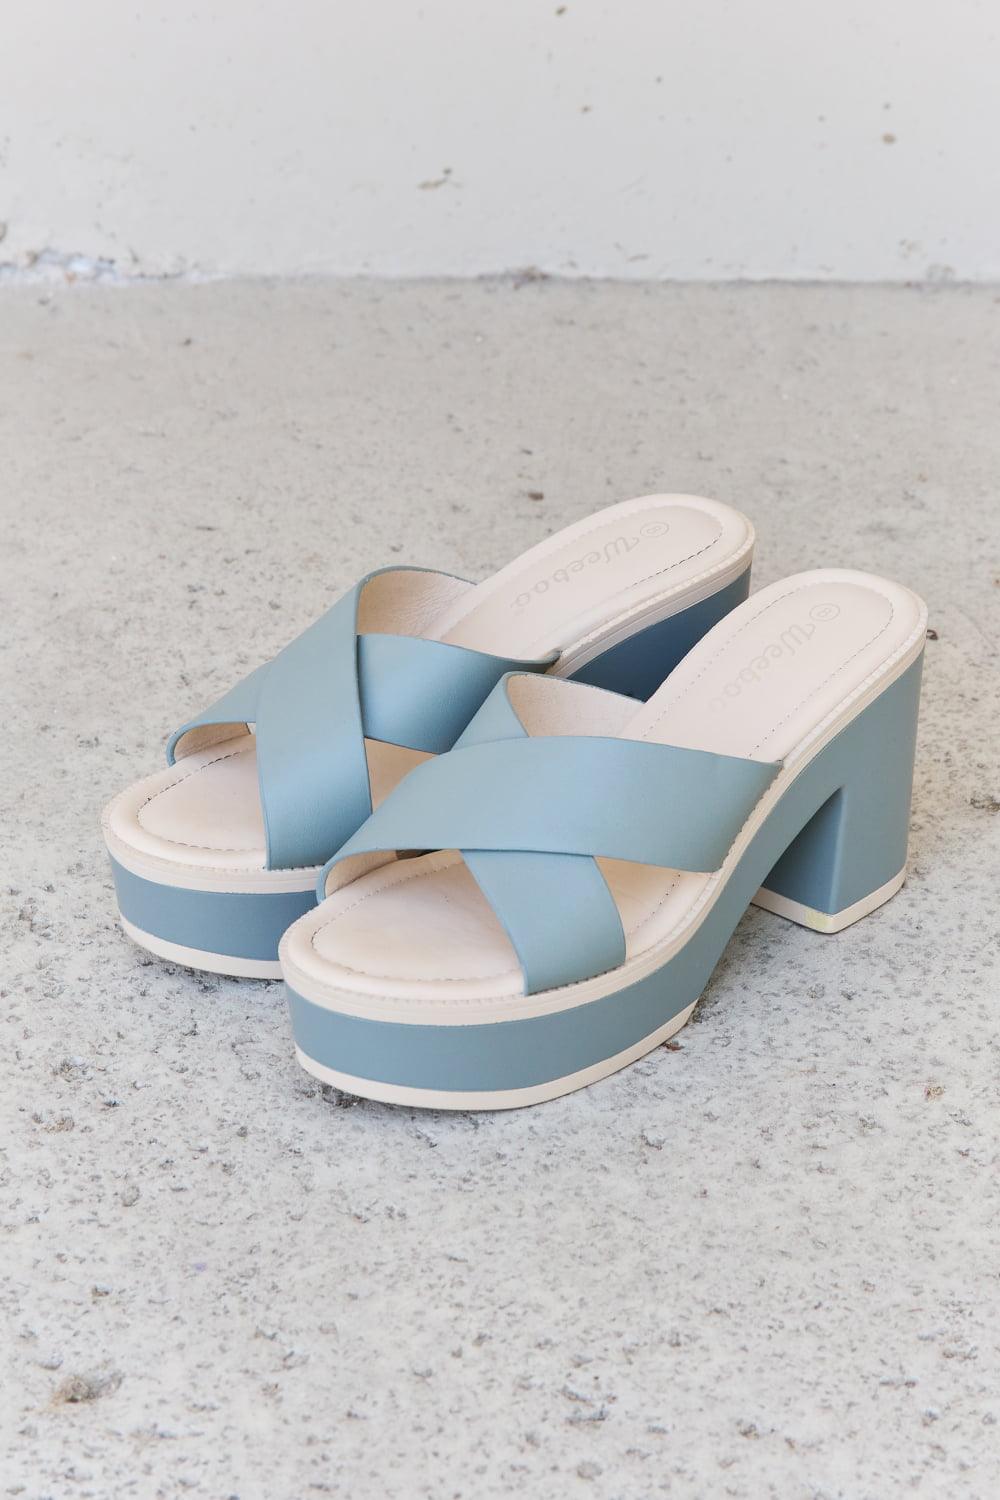 Weeboo Cherish The Moments Contrast Platform Sandals in Misty Blue - CADEAUME